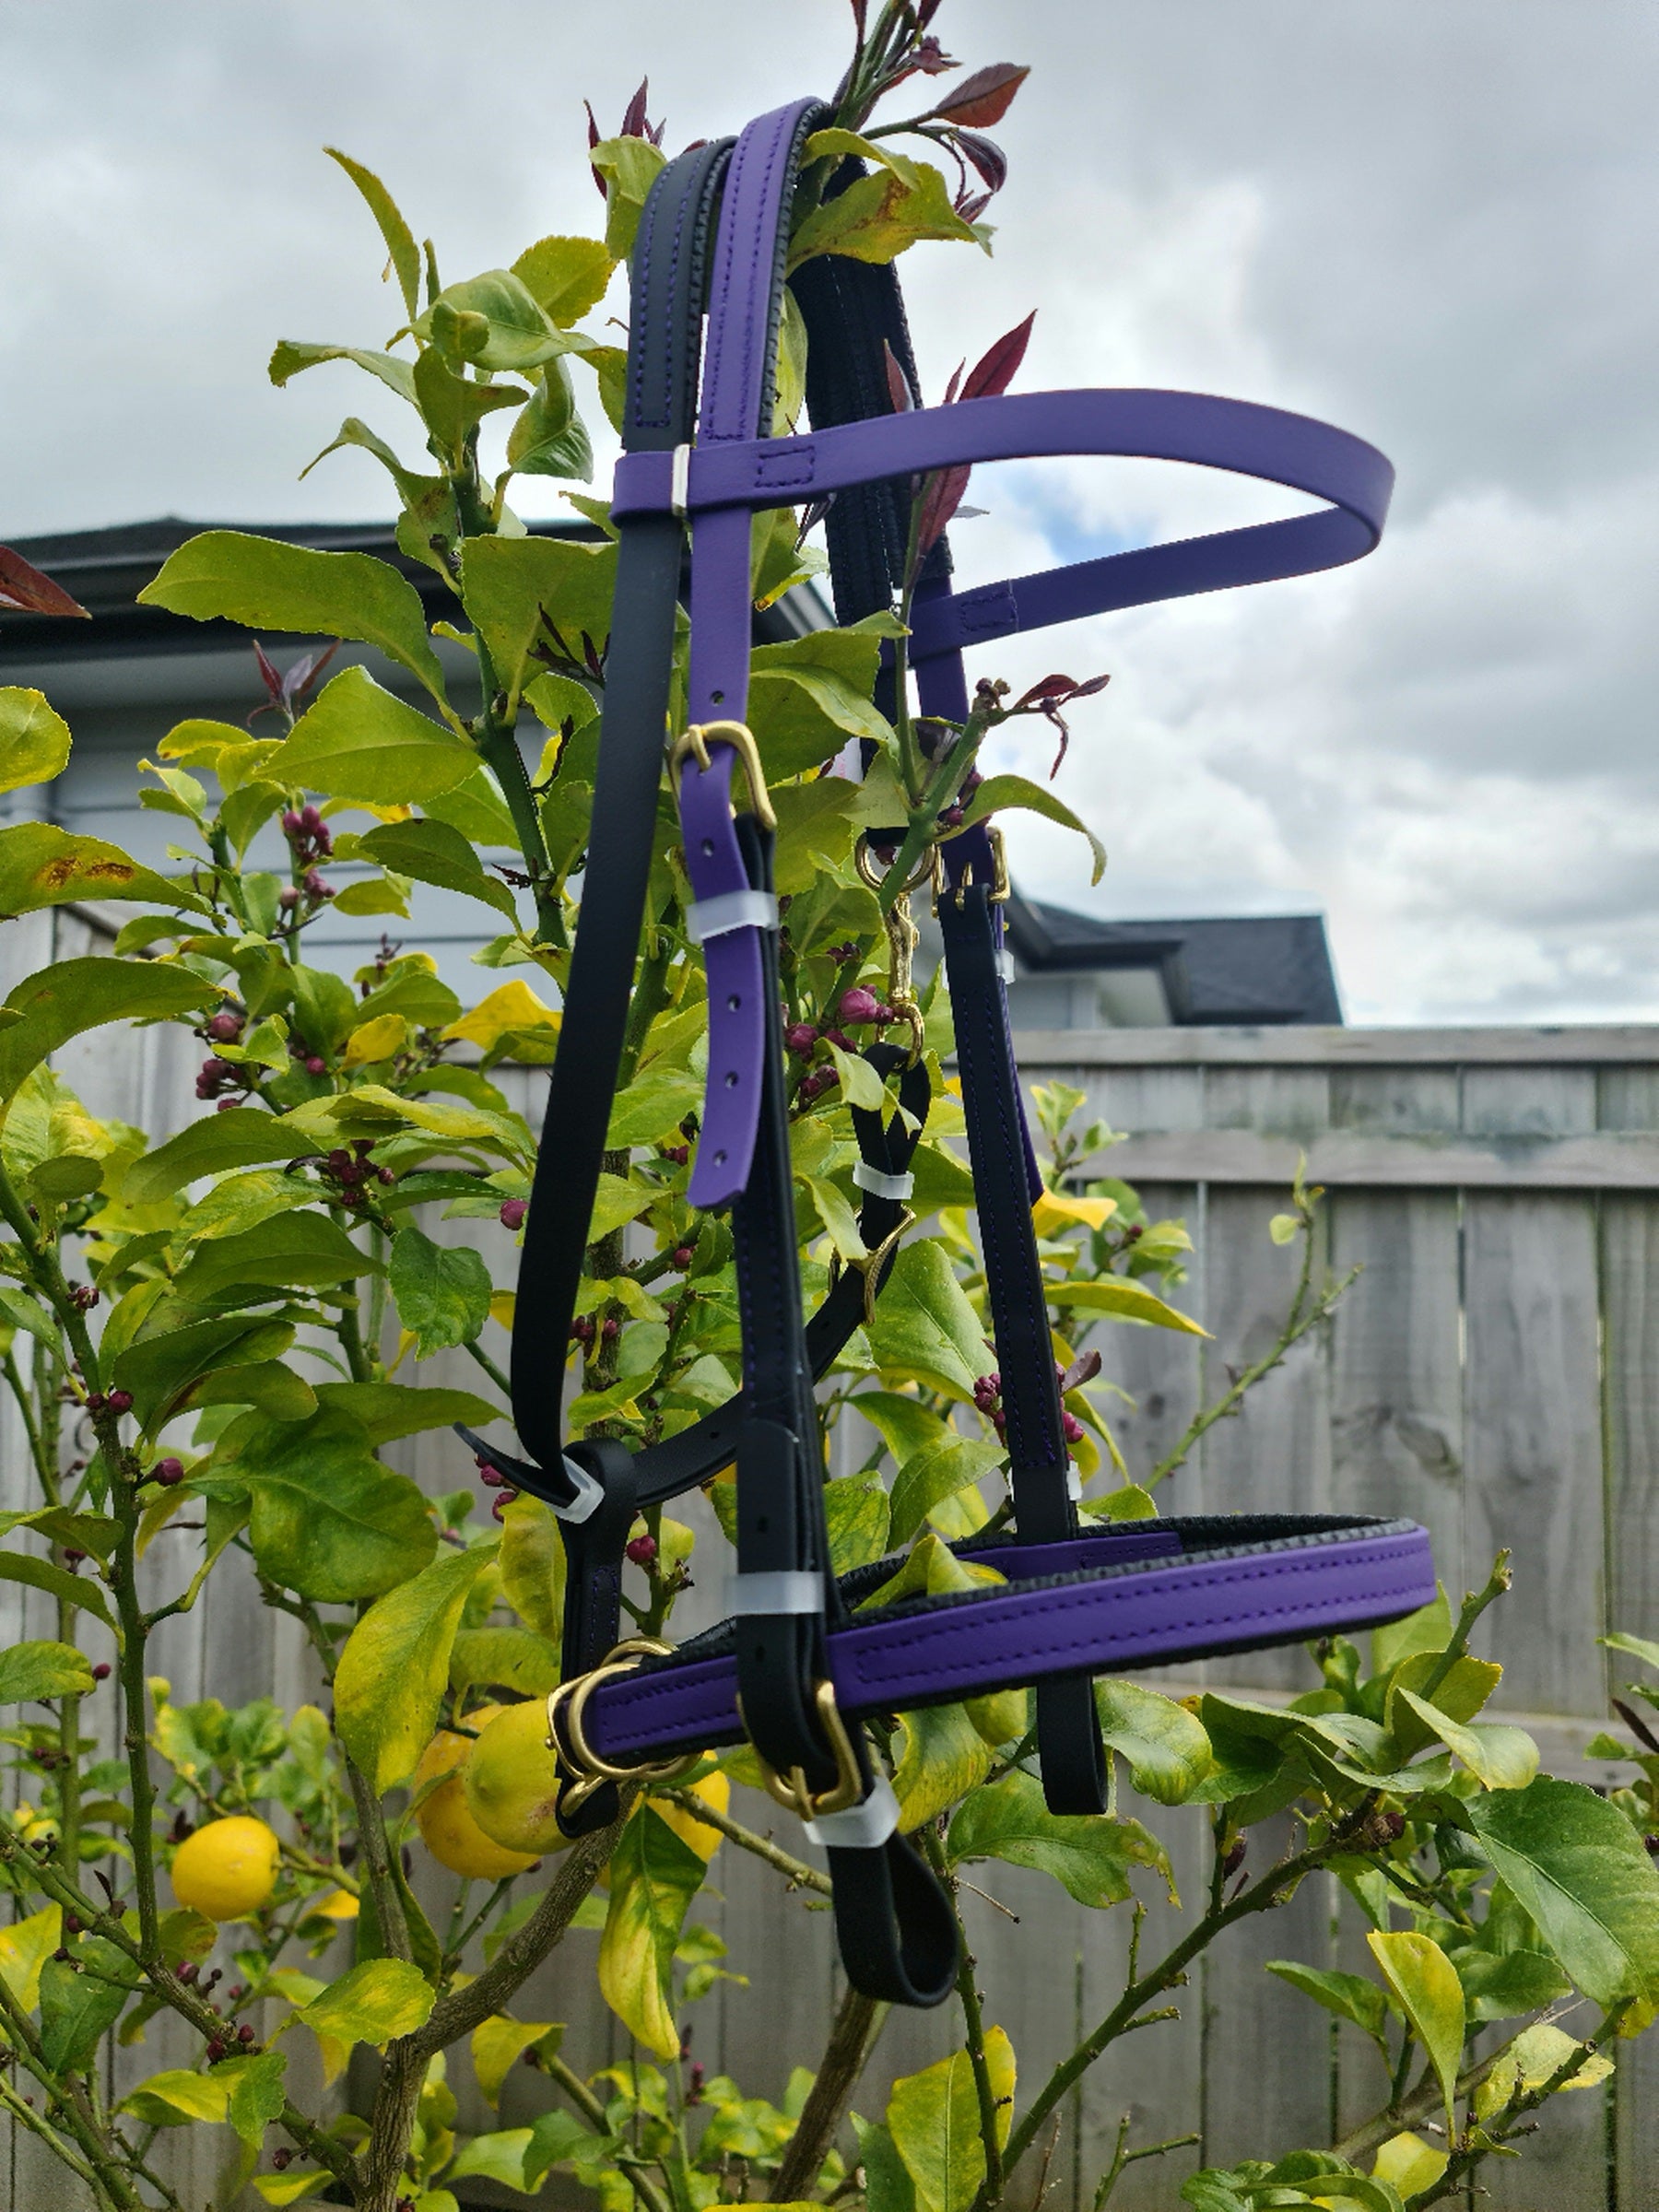 A Simplicity Bridle - Black & Violet by LS Equestrian is hanging on a lemon tree with a few visible lemons. The background shows a wooden fence and a cloudy sky.